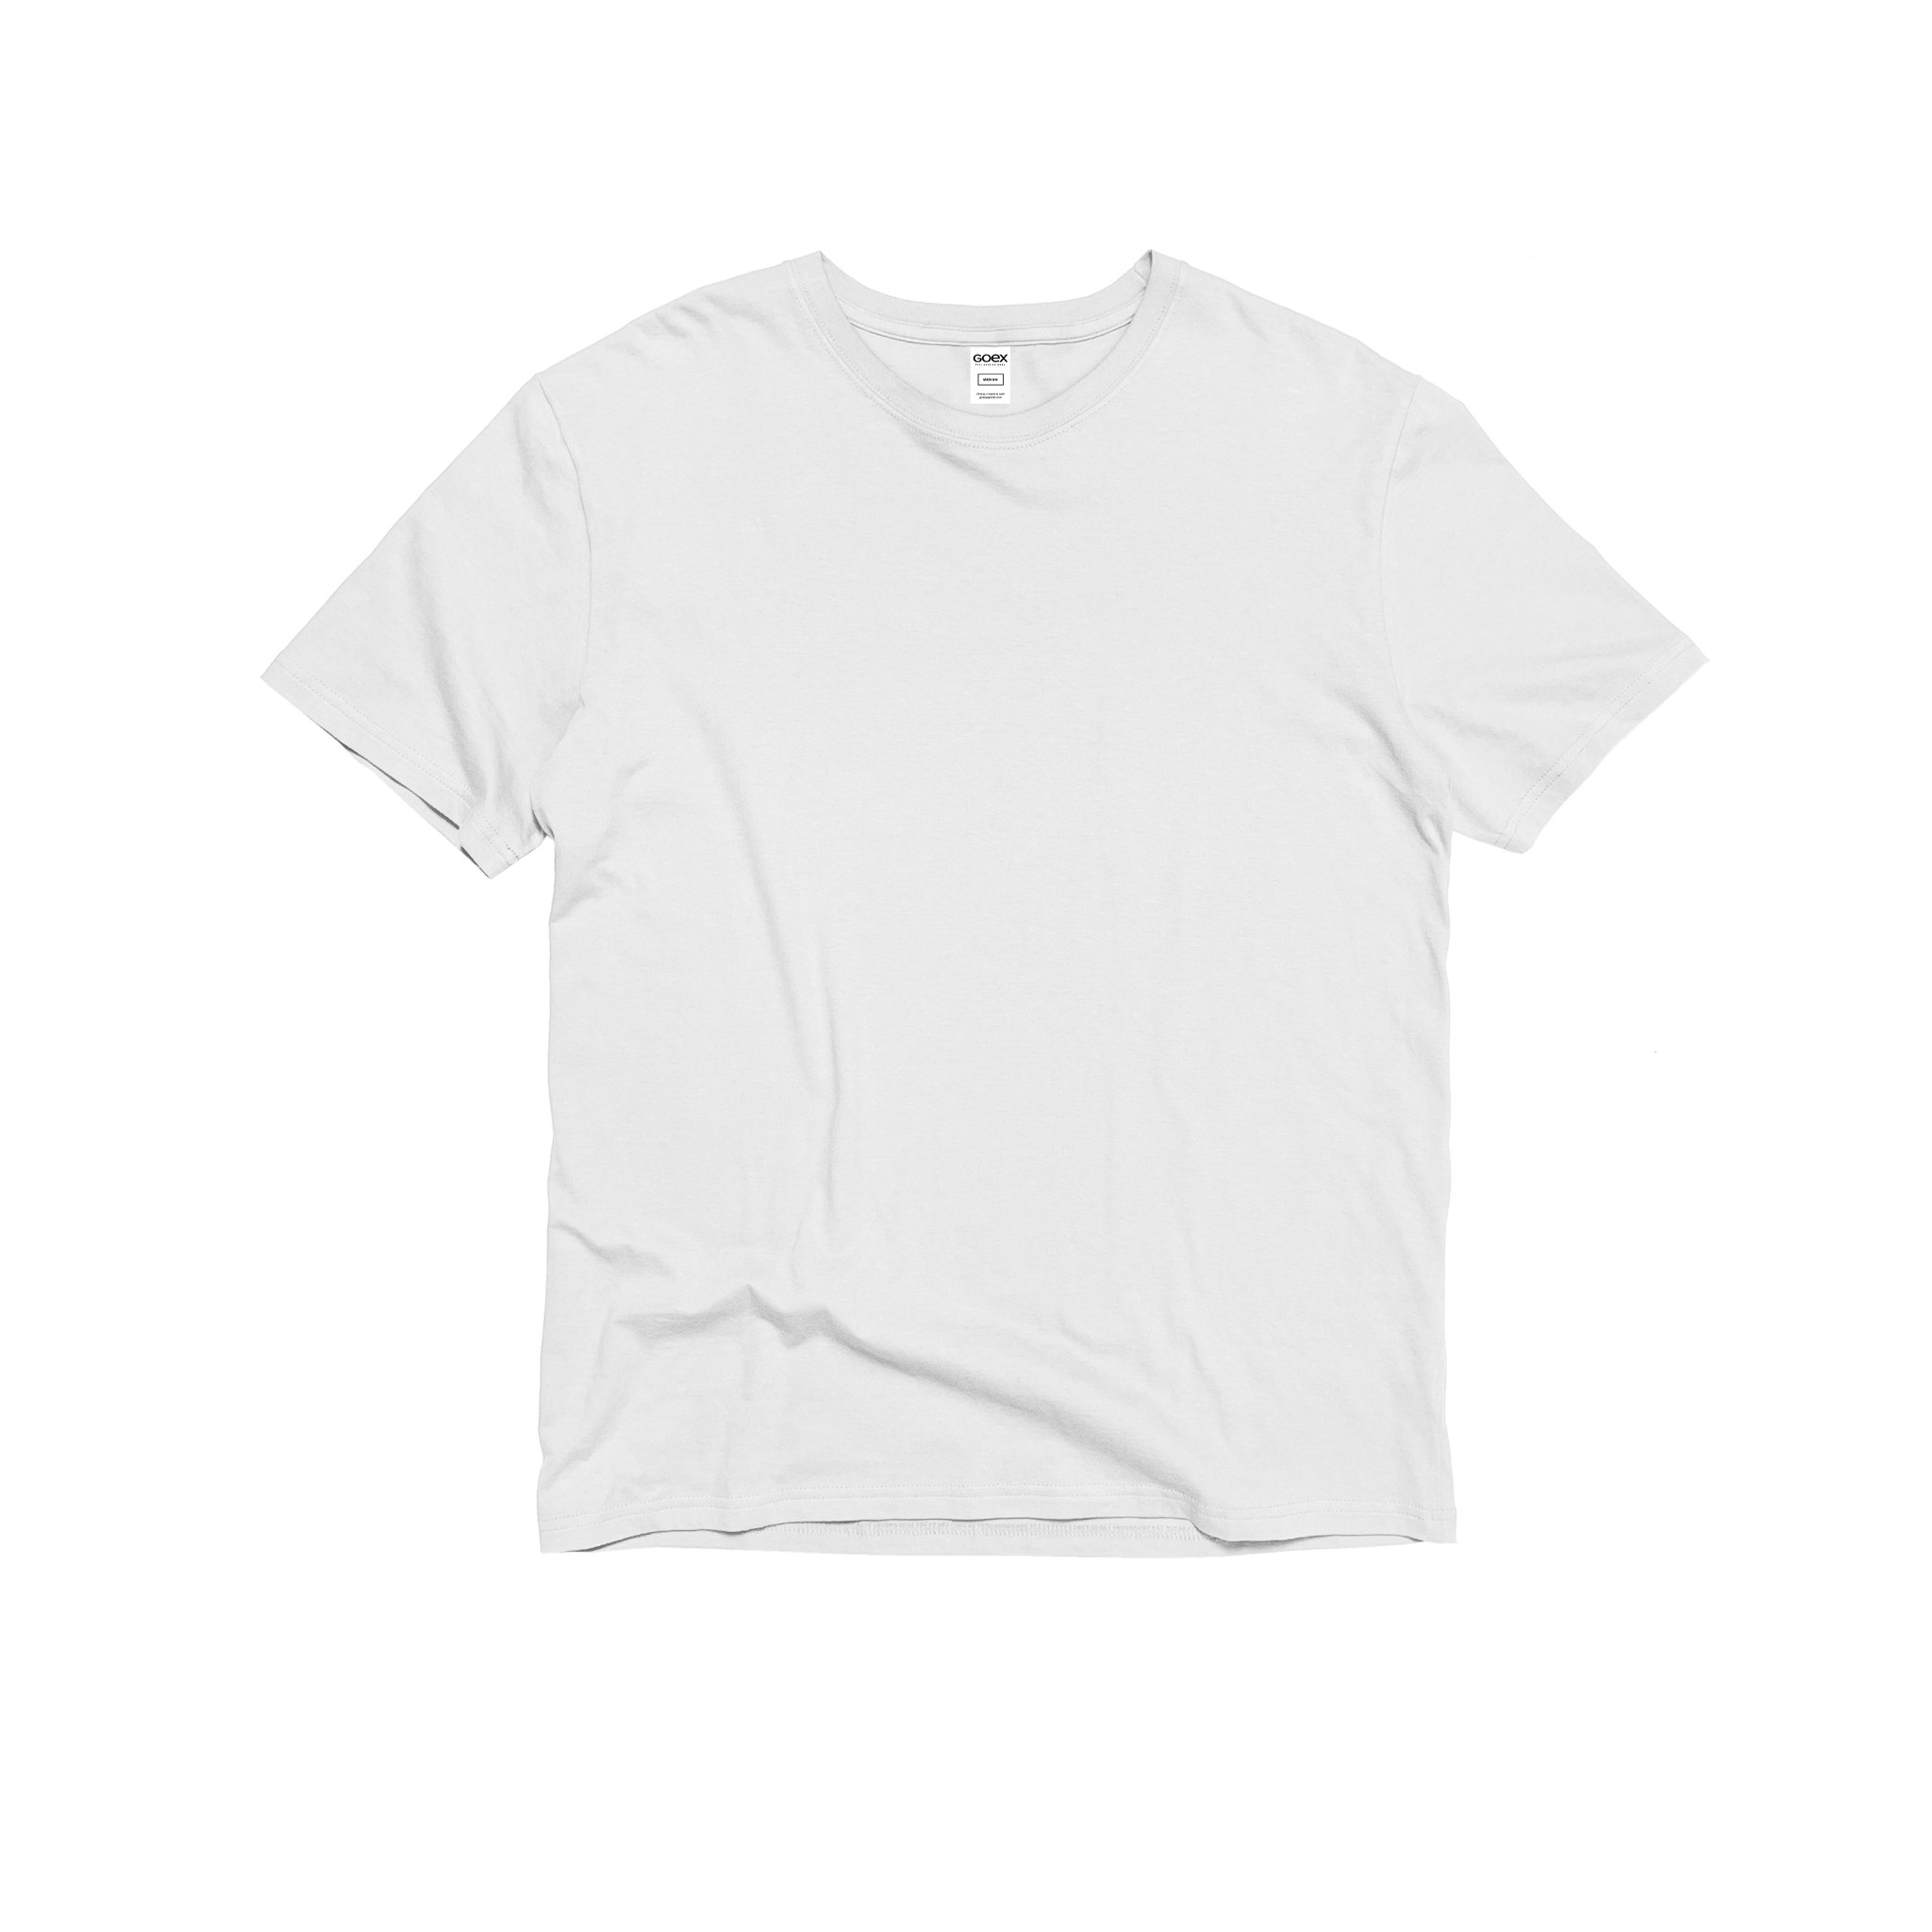 Font Flat Lay of GOEX Unisex and Men's Premium Cotton Tee in White